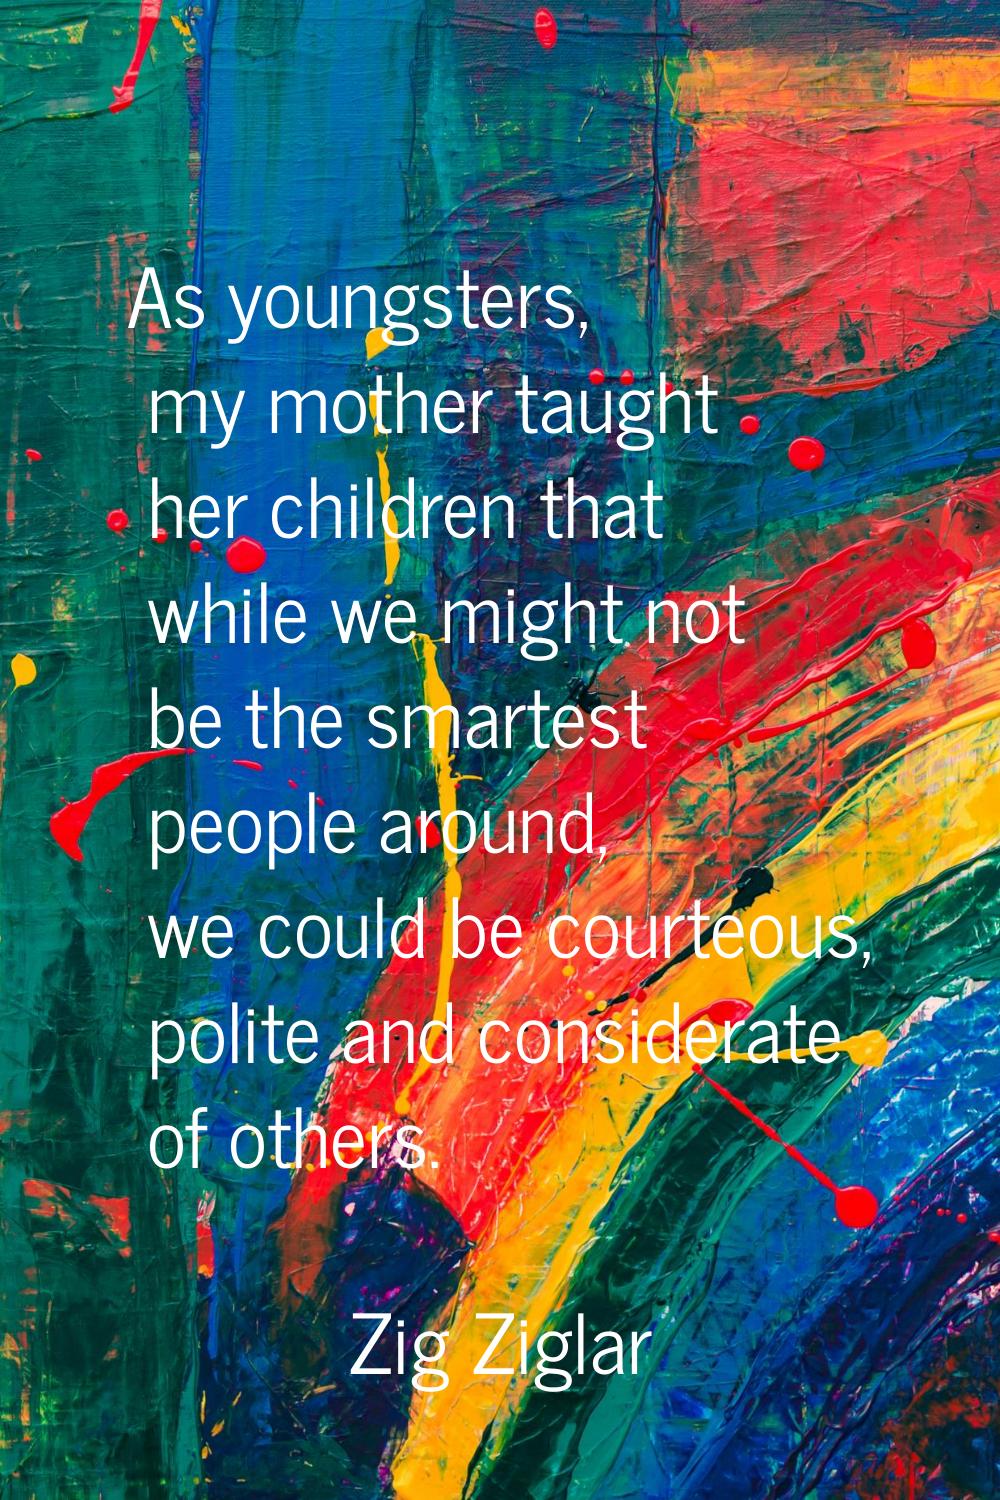 As youngsters, my mother taught her children that while we might not be the smartest people around,